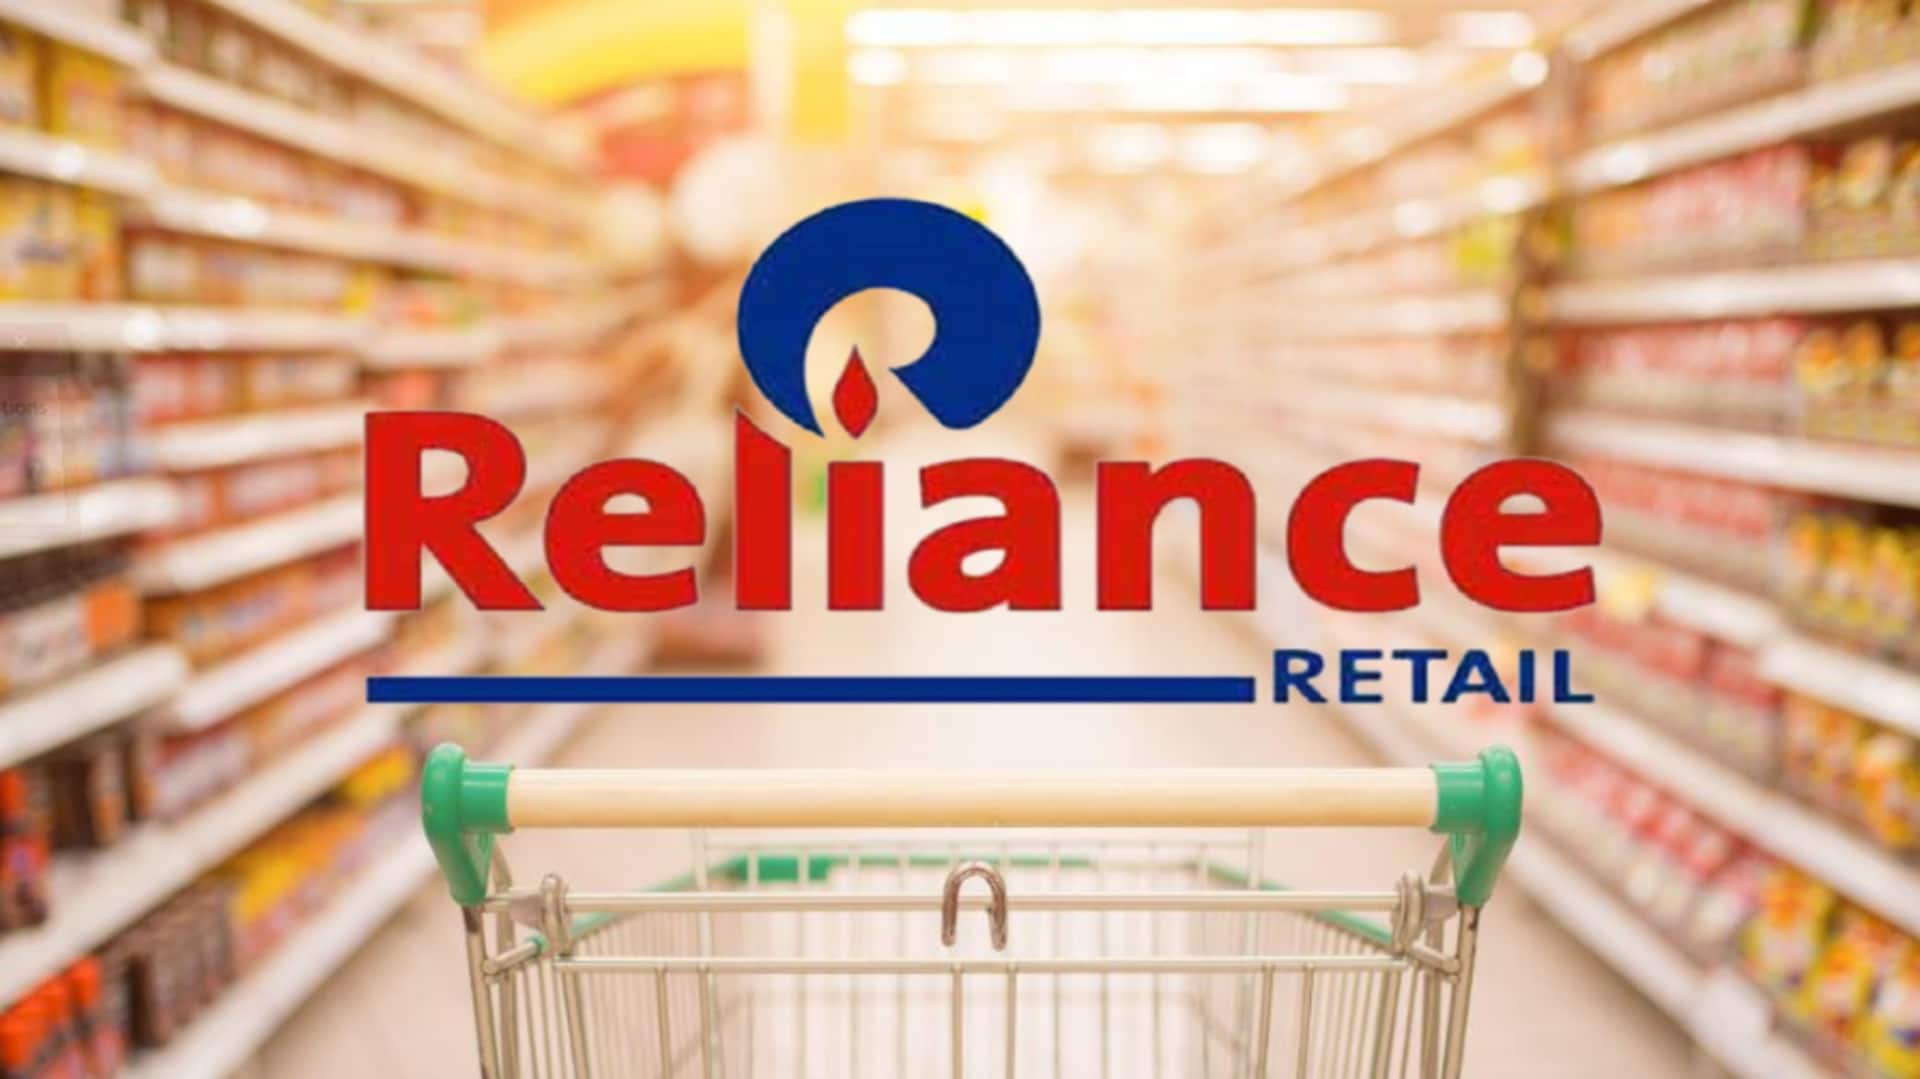 QIA acquires 1% stake in Reliance Retail at $100bn valuation